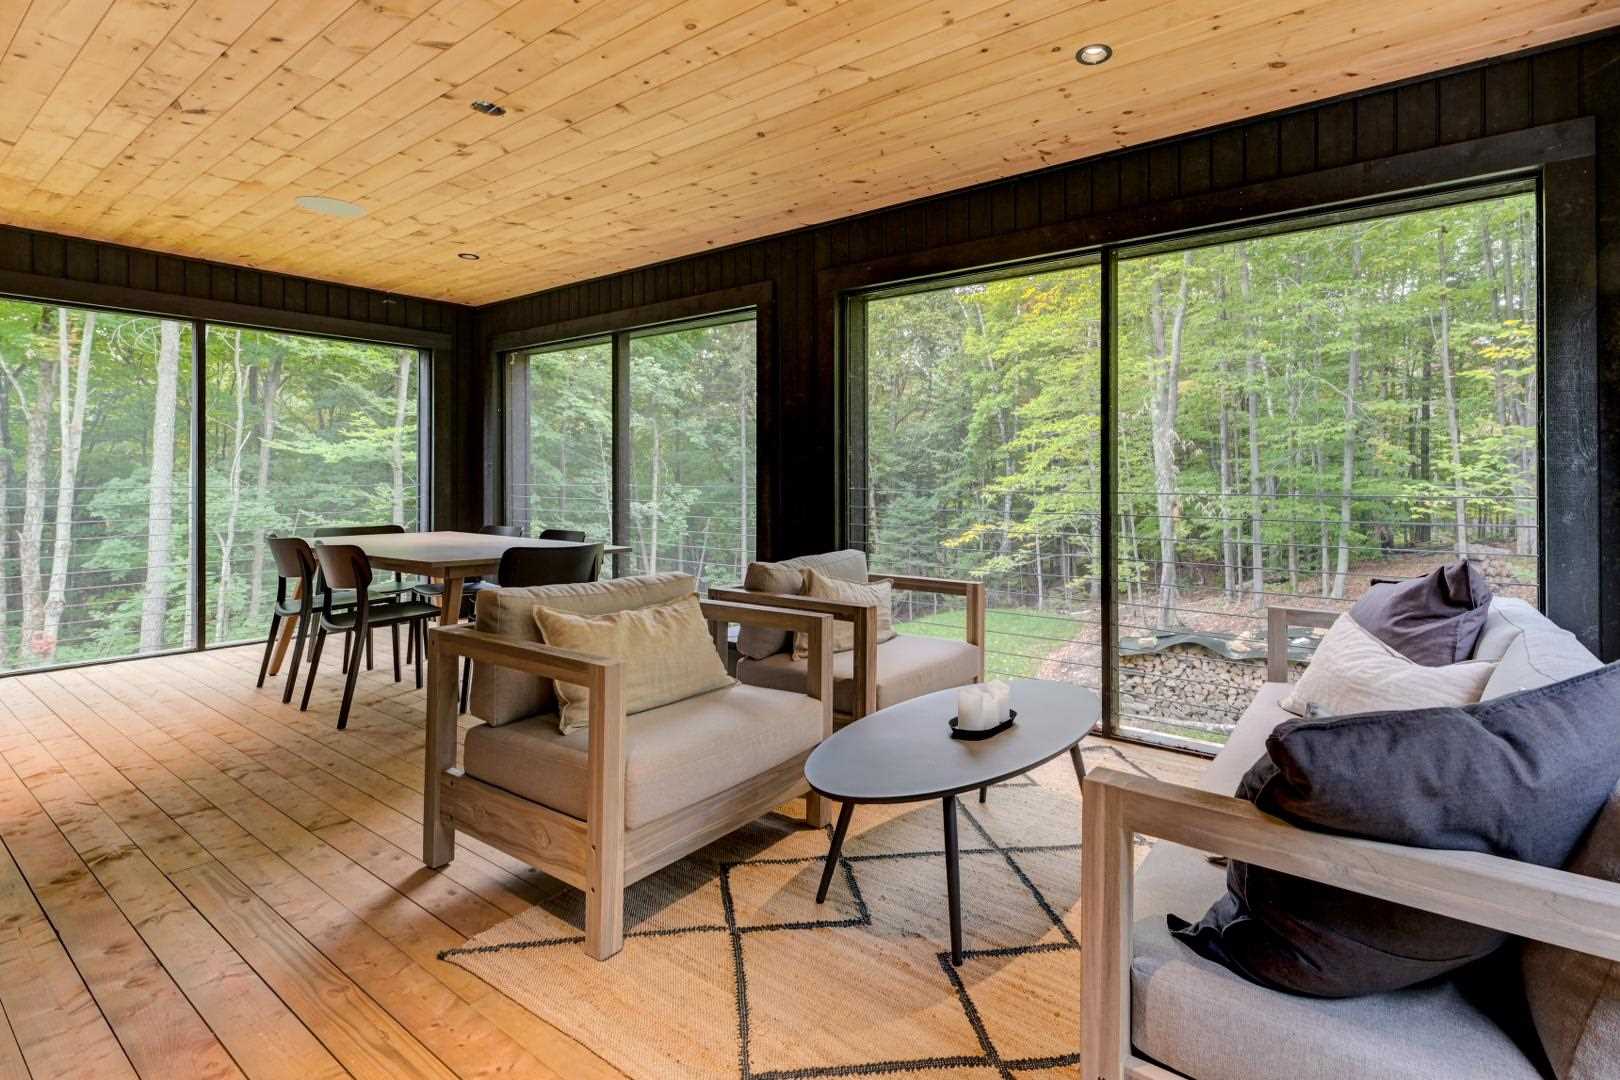 A sunroom with large windows and a wood ceiling, as well as a dining area and lounge.